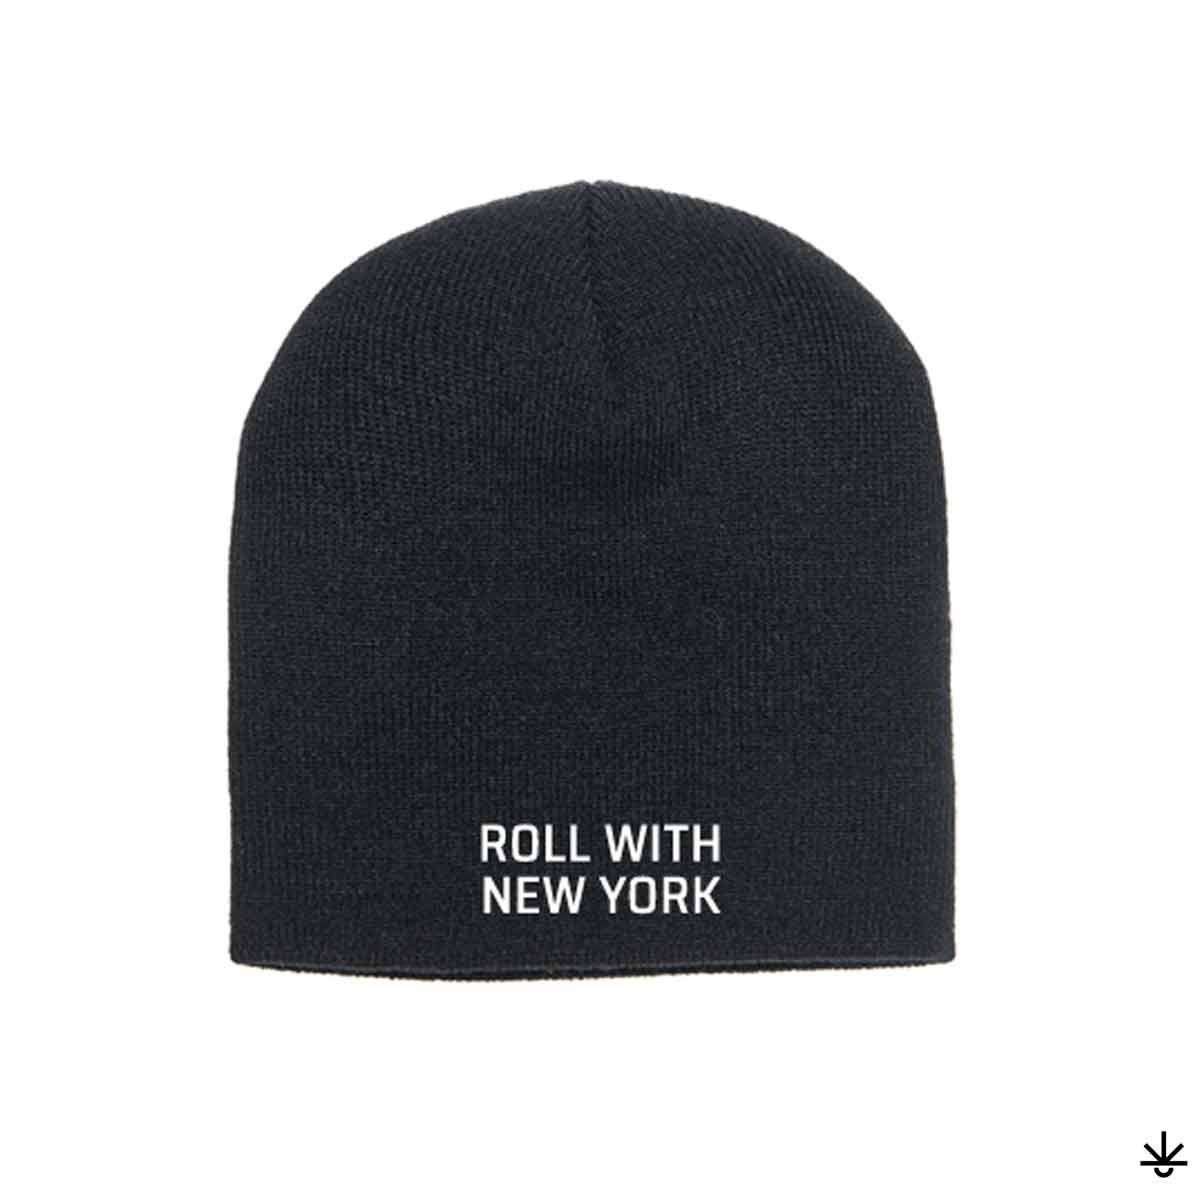 Featured image for “RWNY: Black Beanie”